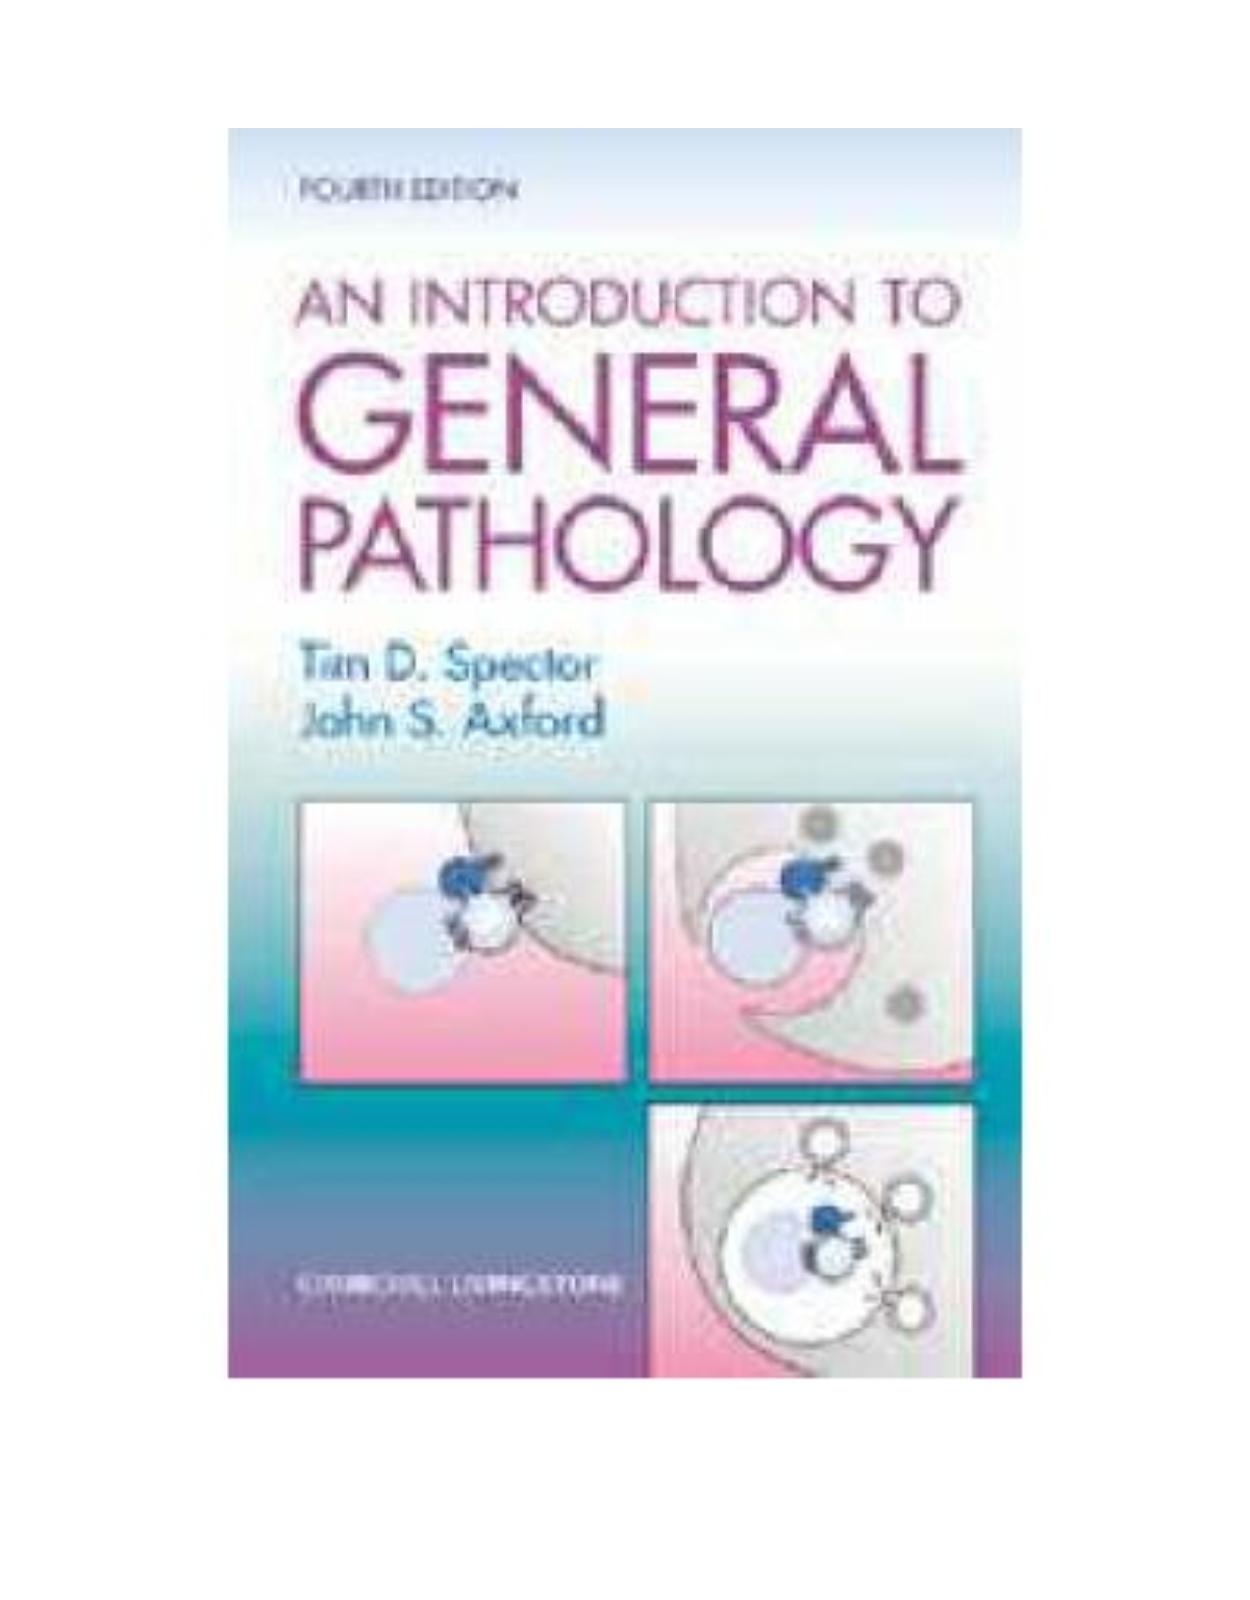 An Introduction to General Pathology 4th. Ed.